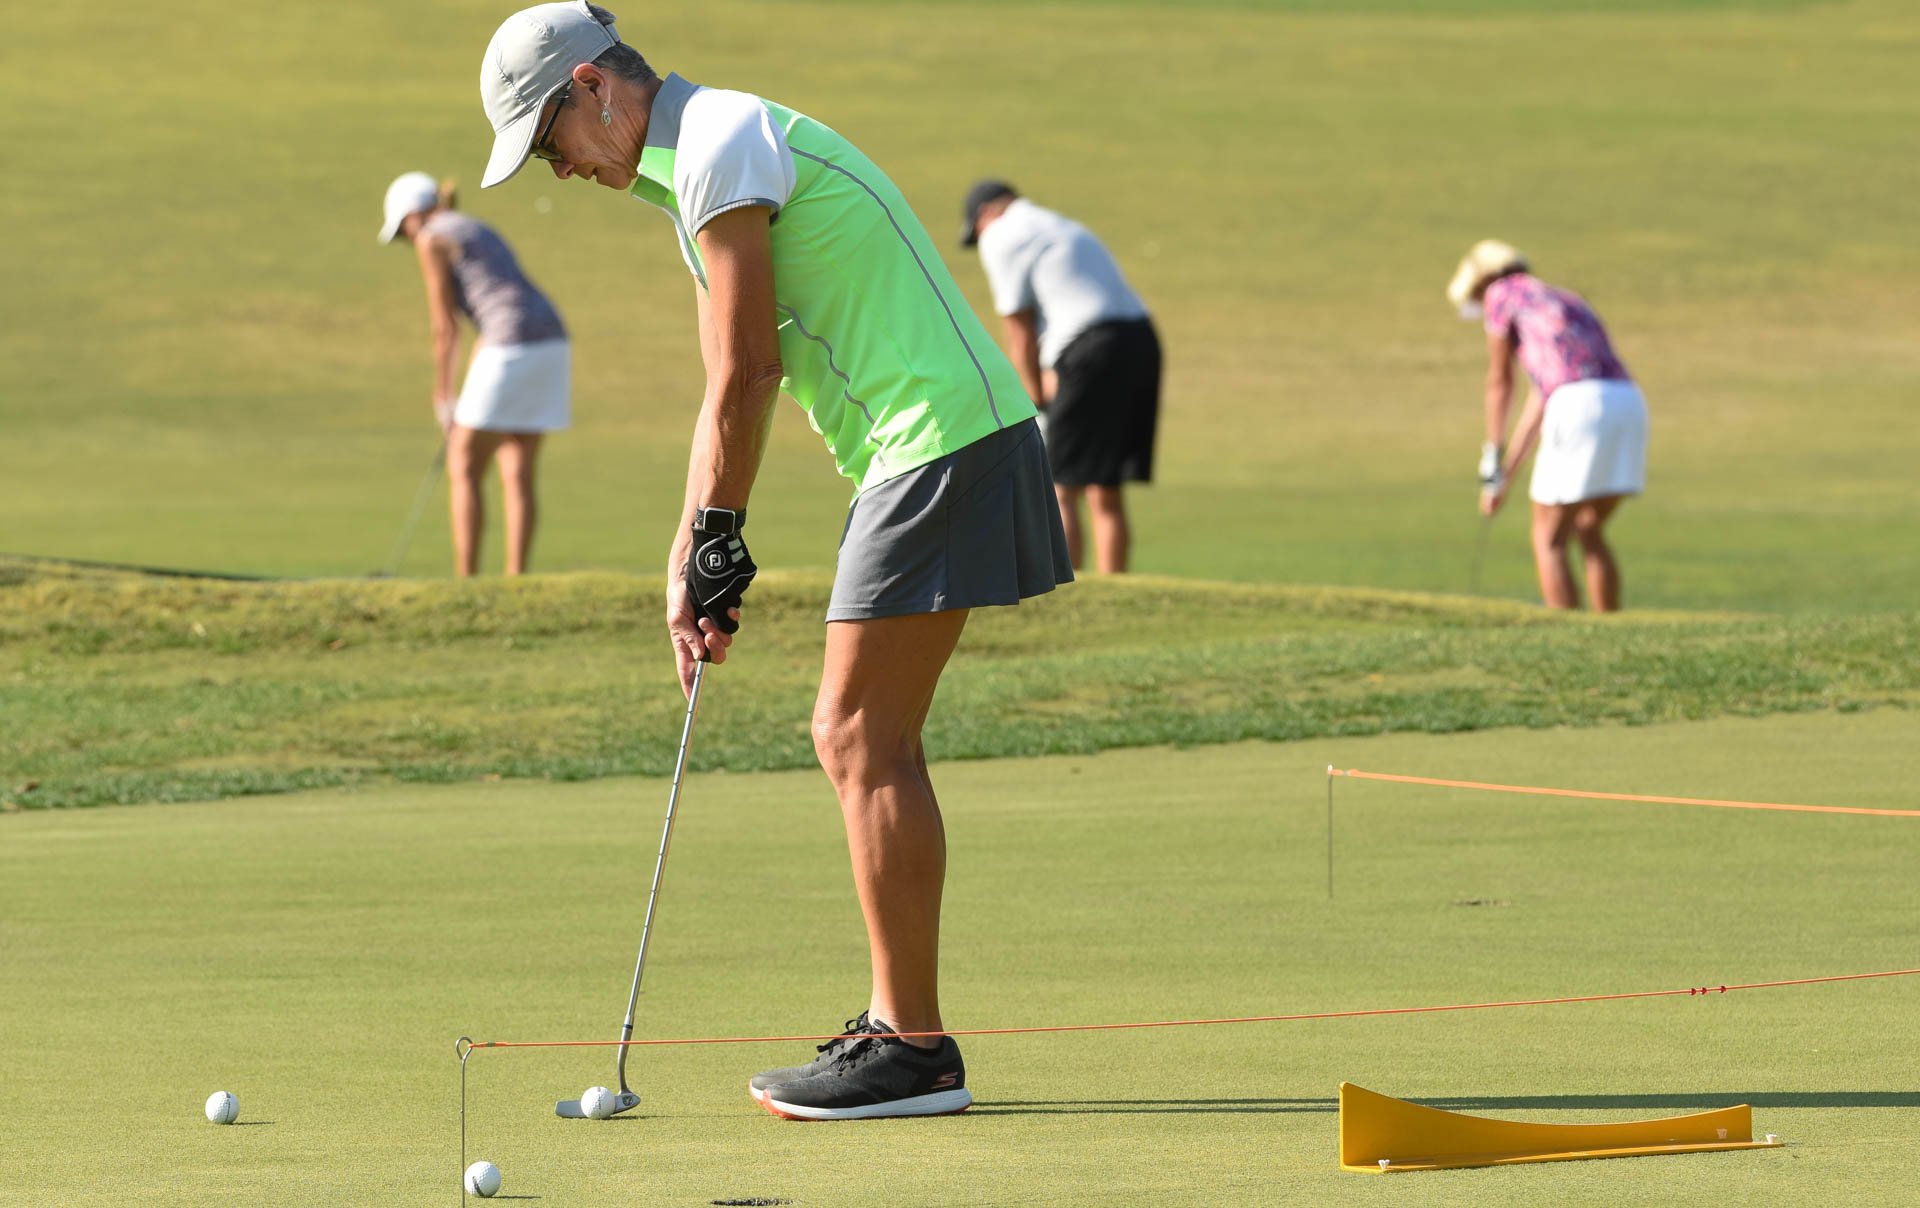 Practice Your Putting Stroke